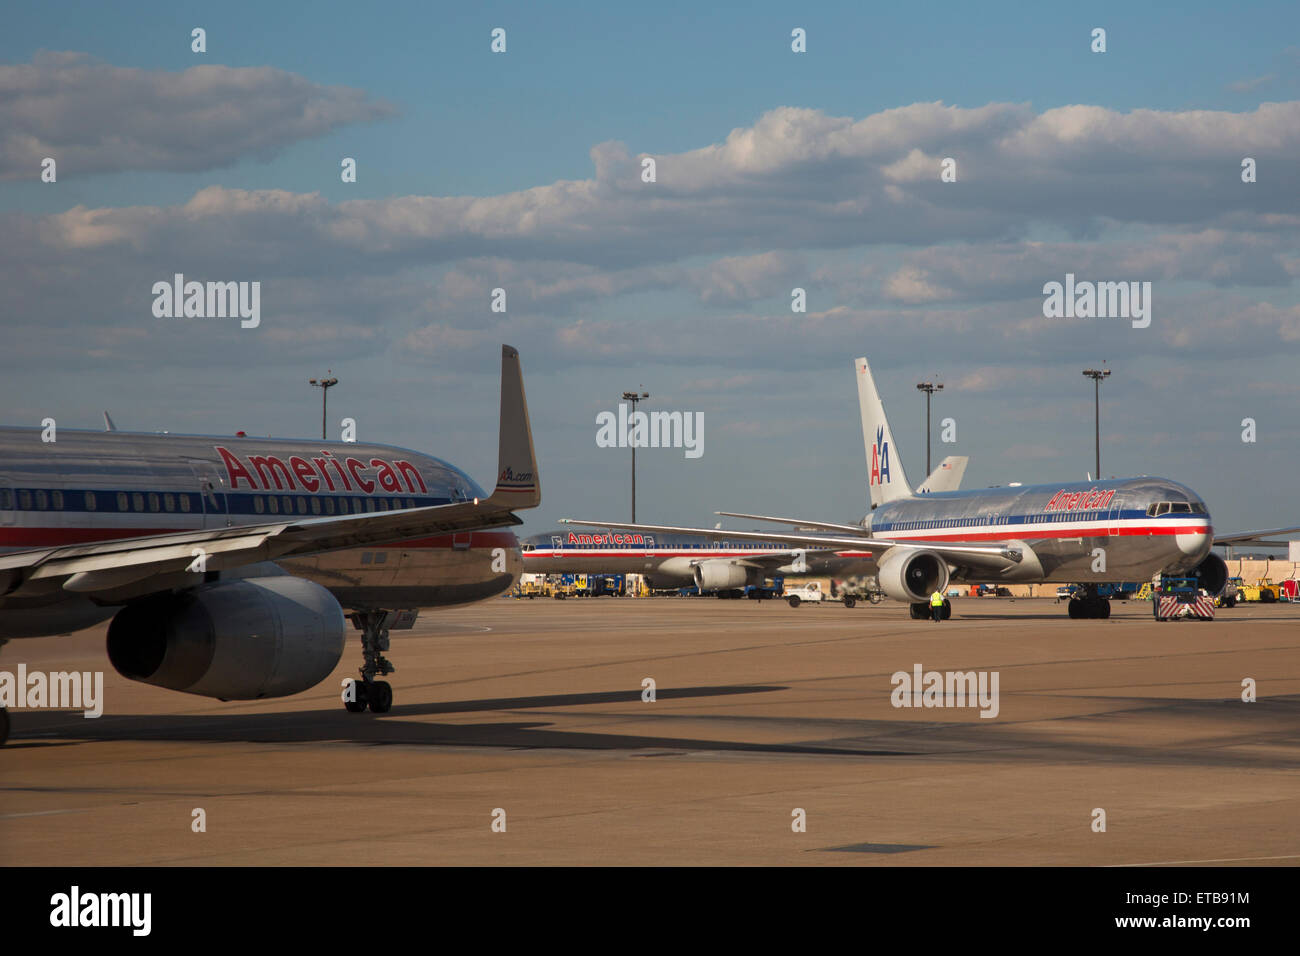 Dallas/Fort Worth International Airport, Texas - American Airlines jets at DFW. The airport is American's largest hub. Stock Photo